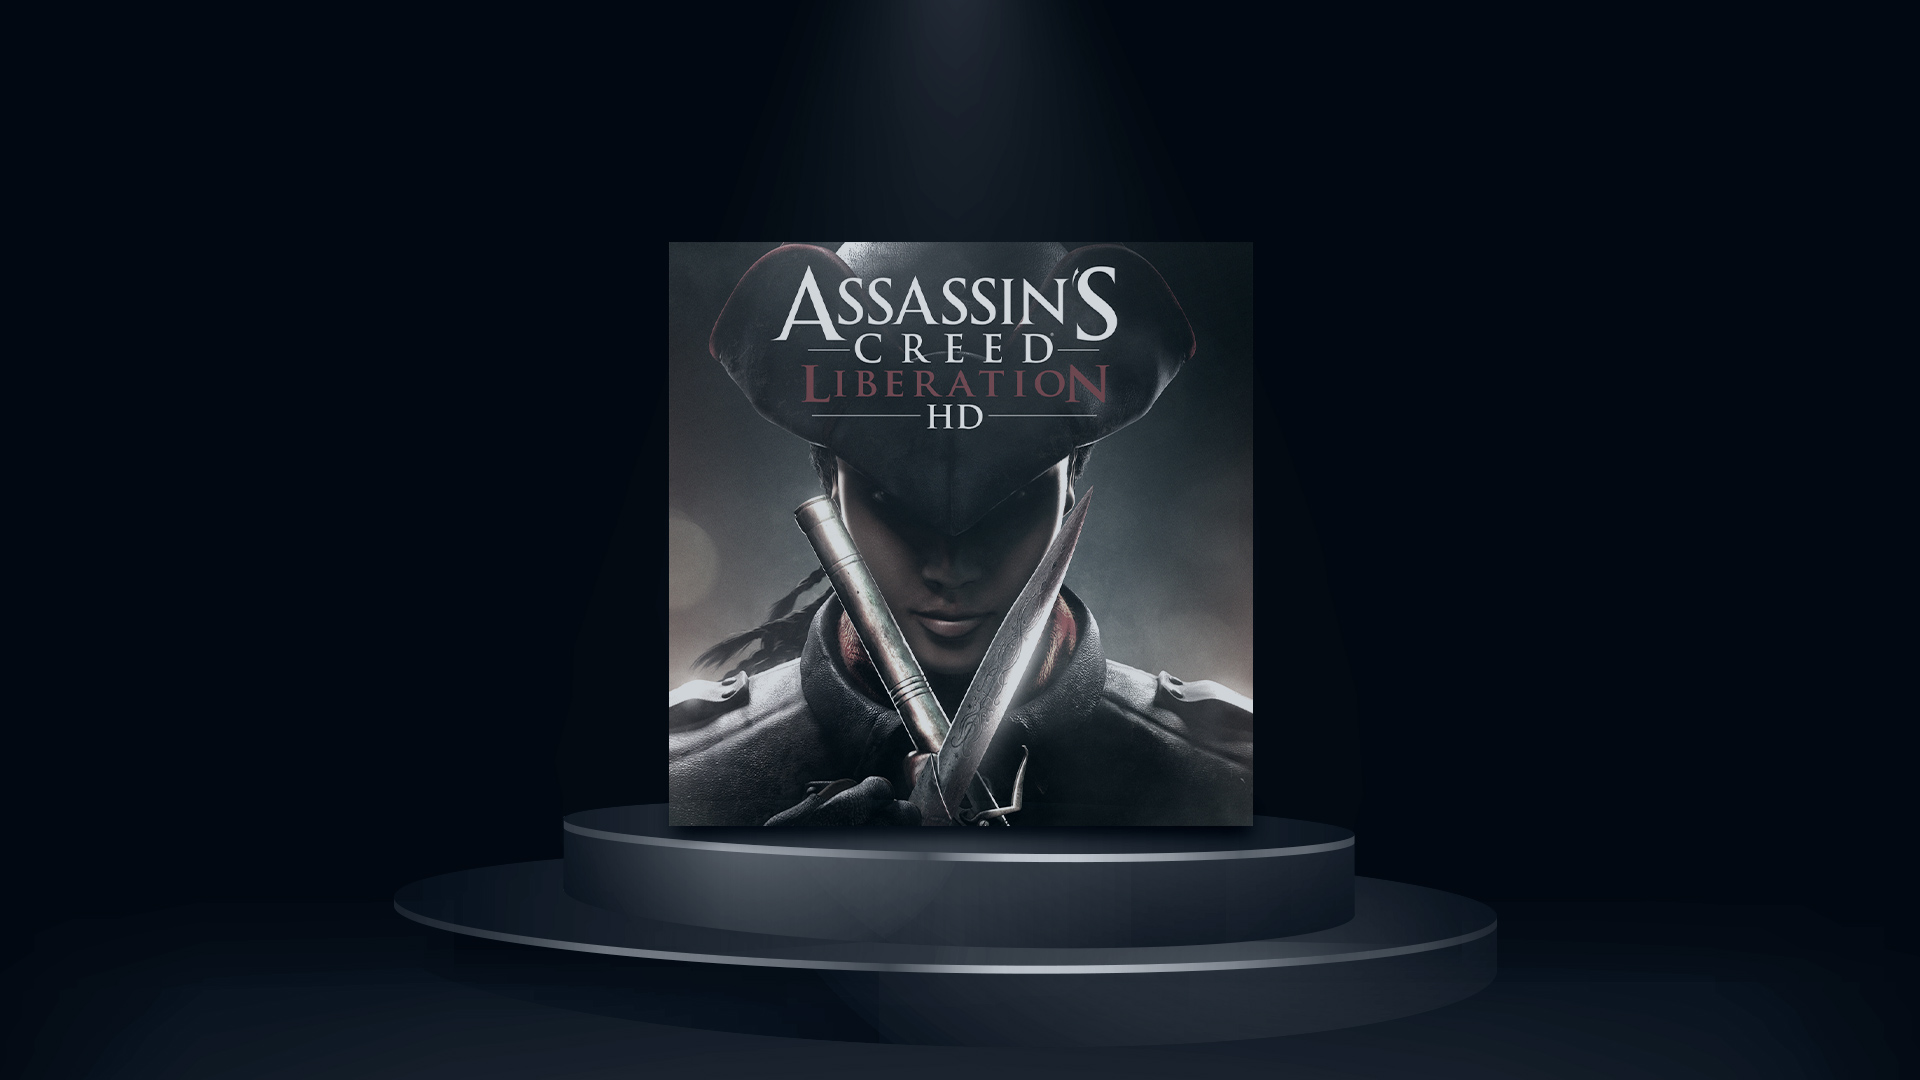 Ubisoft confuses players with Assassin's Creed Liberation HD notice